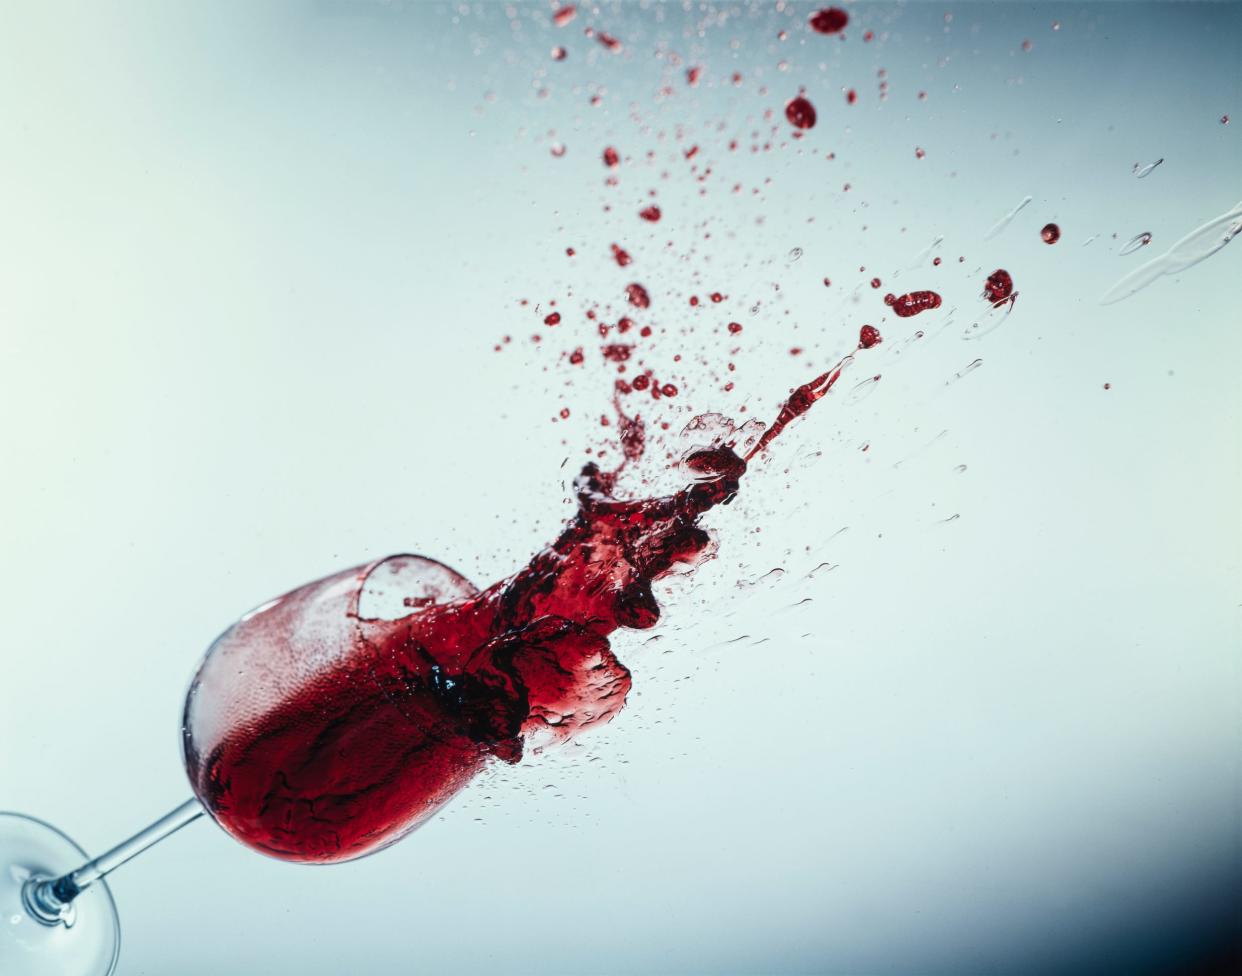 A glass of wine falling as the wine spills out